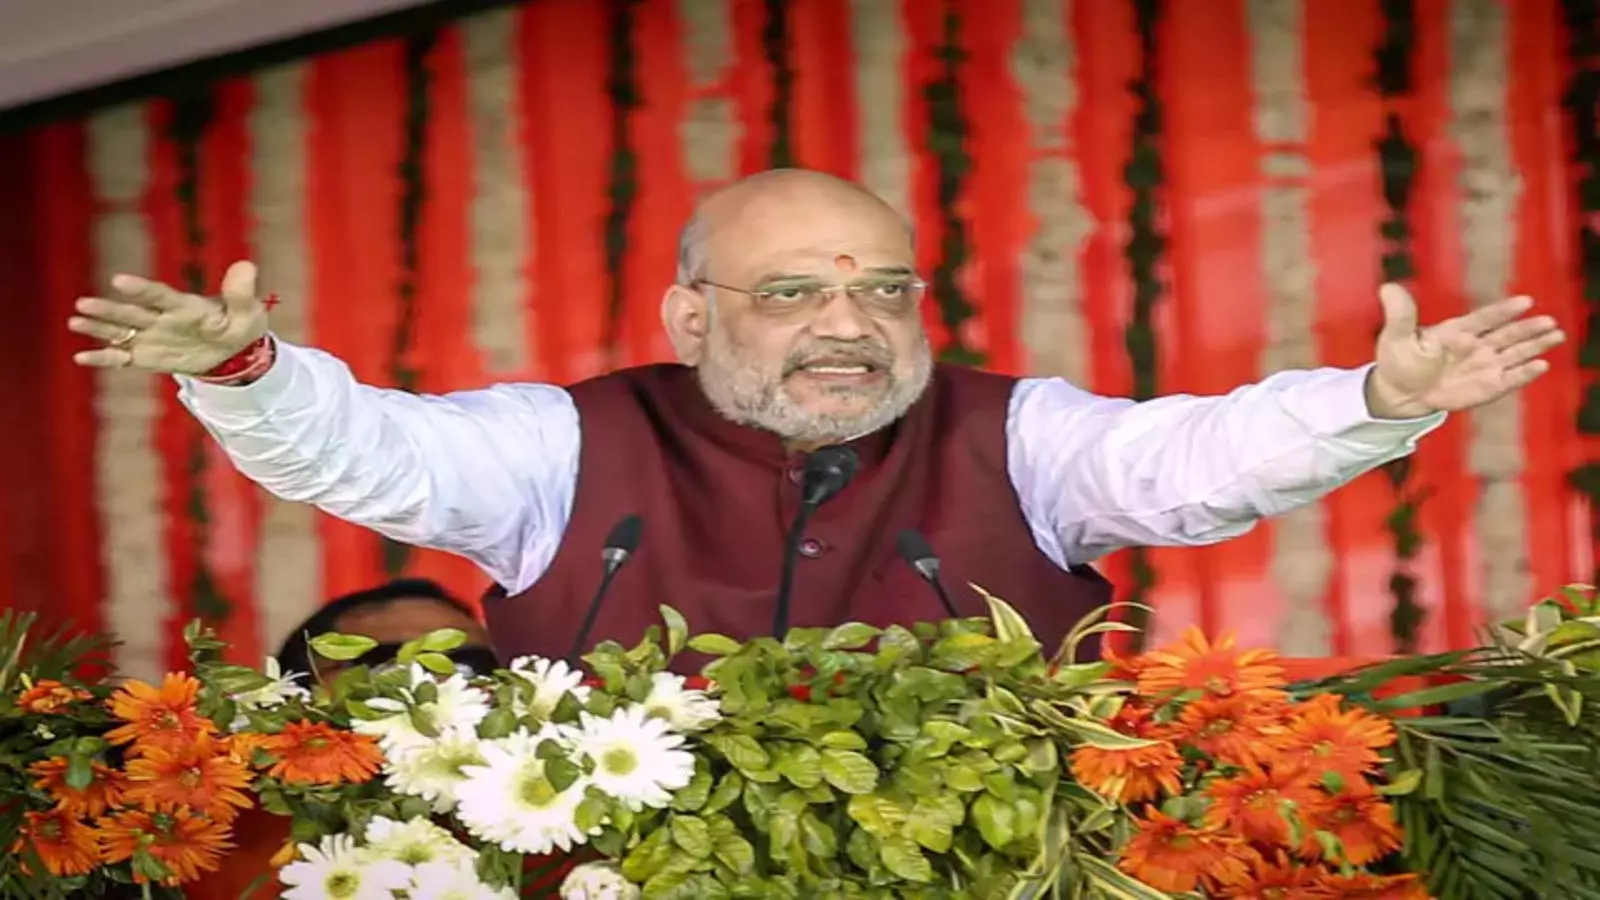 Amit Shah kicks off BJP’s poll campaign in J&K with ST status for 8 lakh Paharis